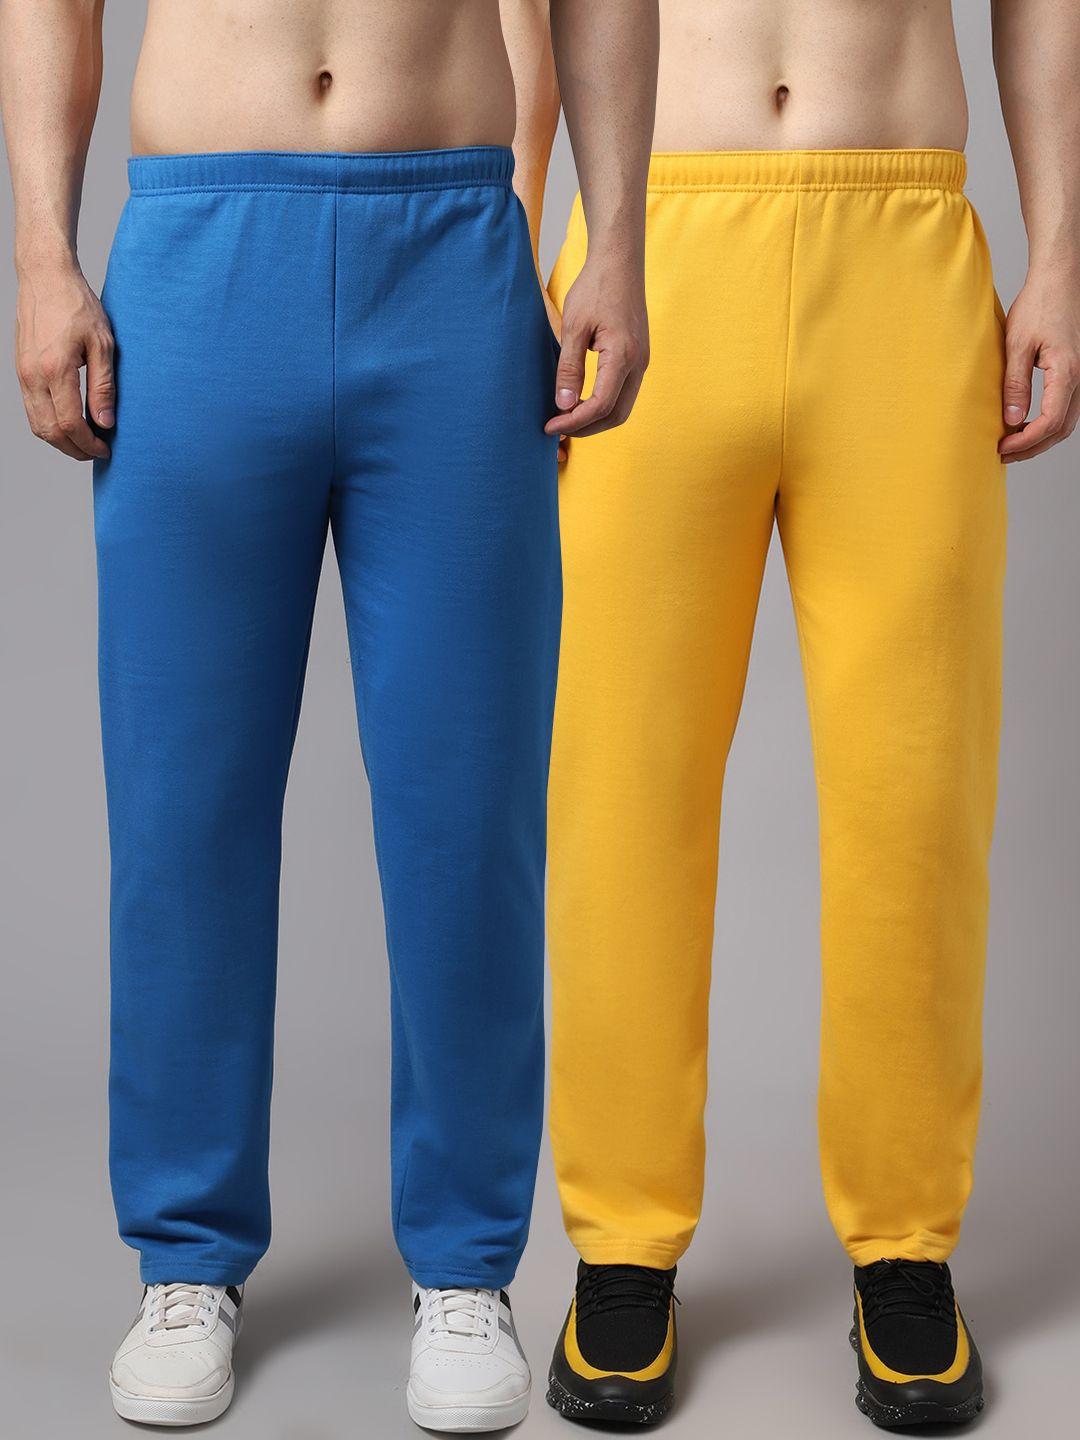 vimal-jonney-men-pack-of-2-blue-&-yellow-solid-pure-cotton-track-pants